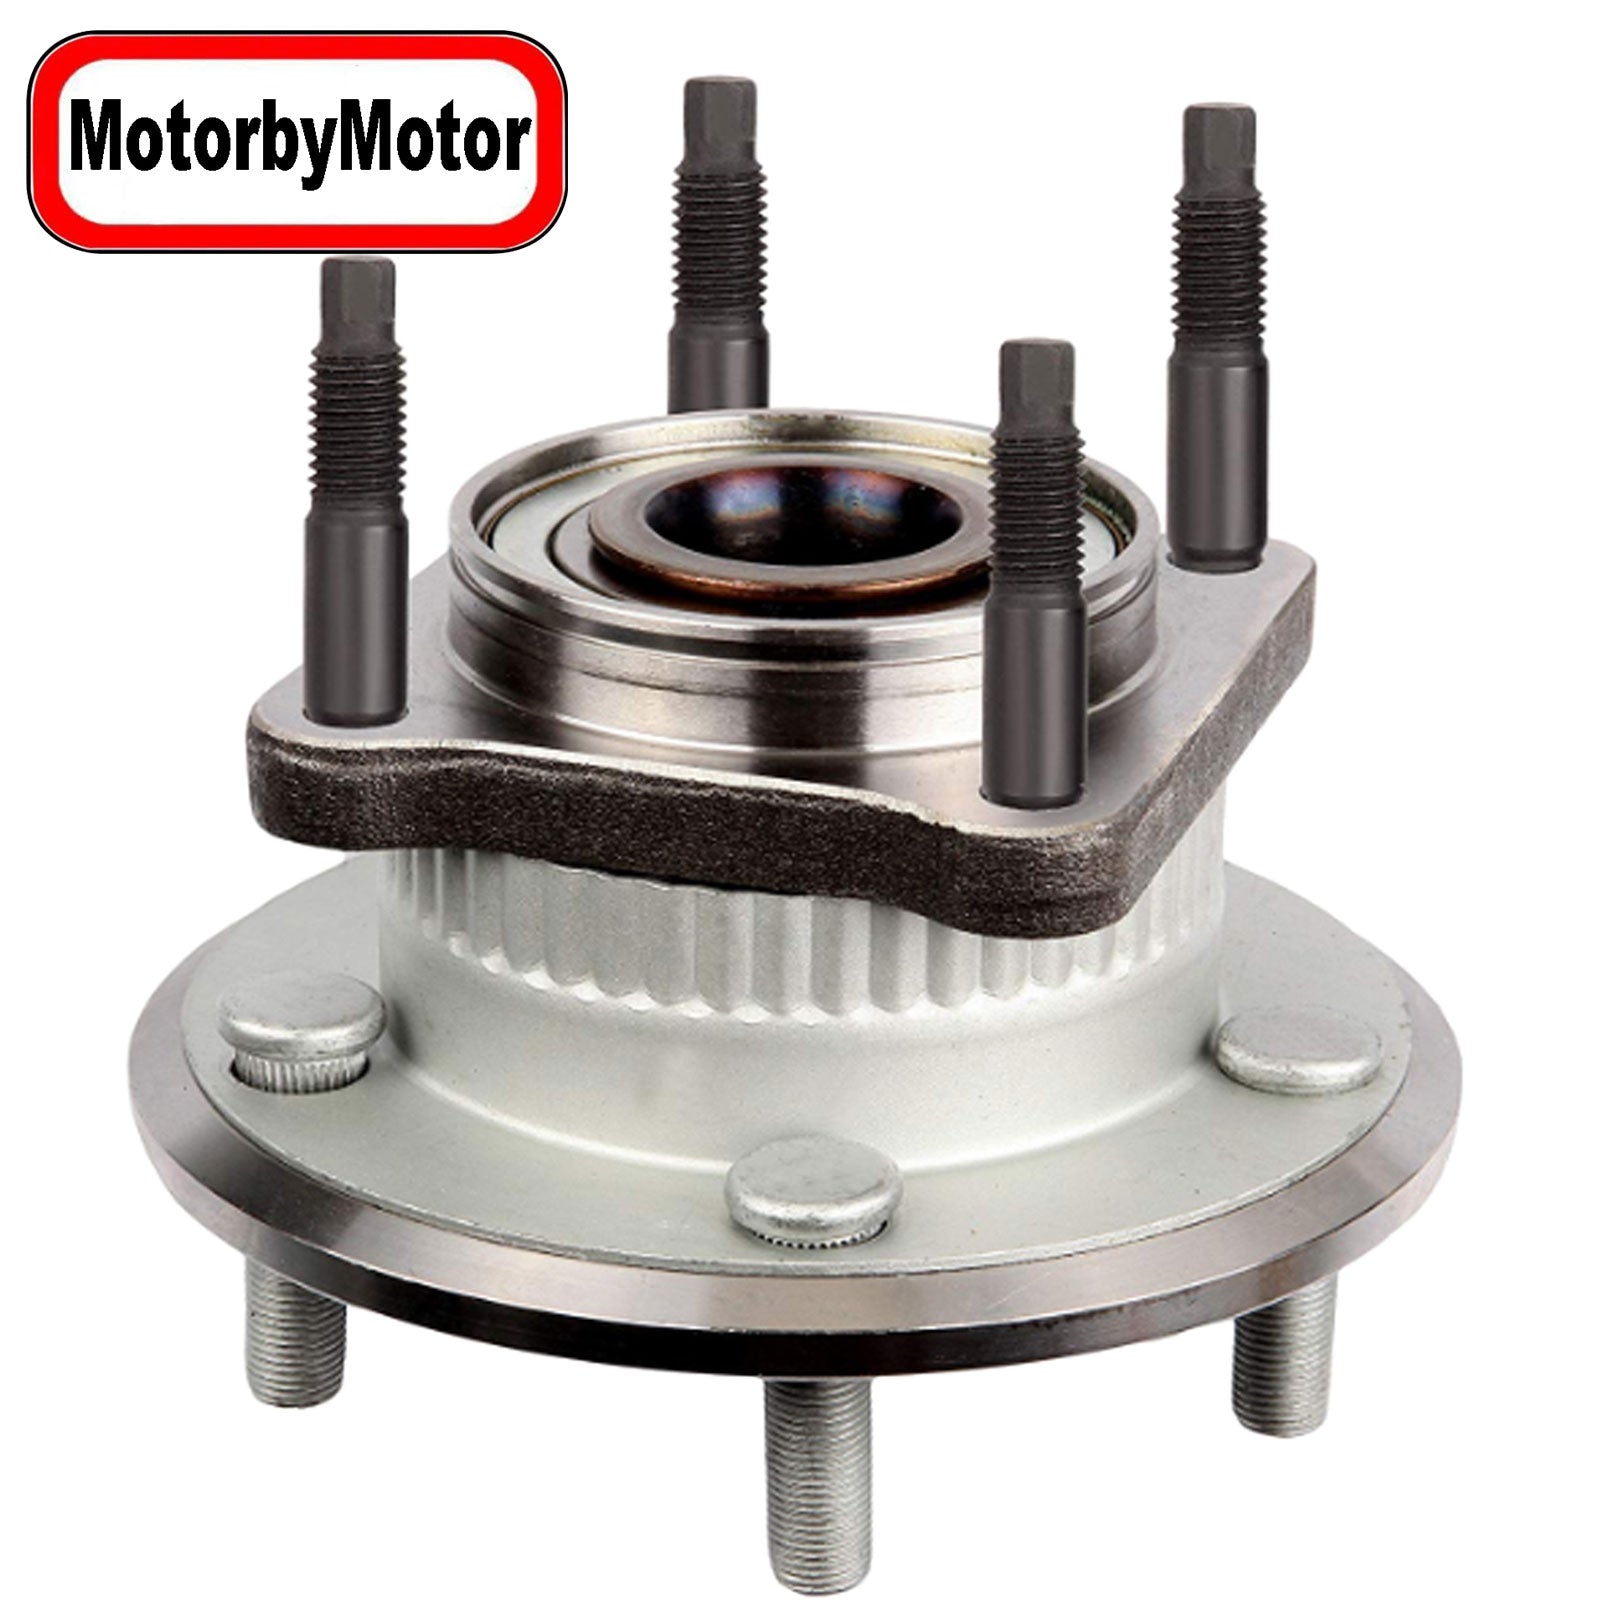 MotorbyMotor 512302 Rear Wheel Bearing and Hub Assembly with 5 Lugs fits for Jeep Commander Grand Cherokee Low-Runout OE Directly Replacement Hub Bearing MotorbyMotor